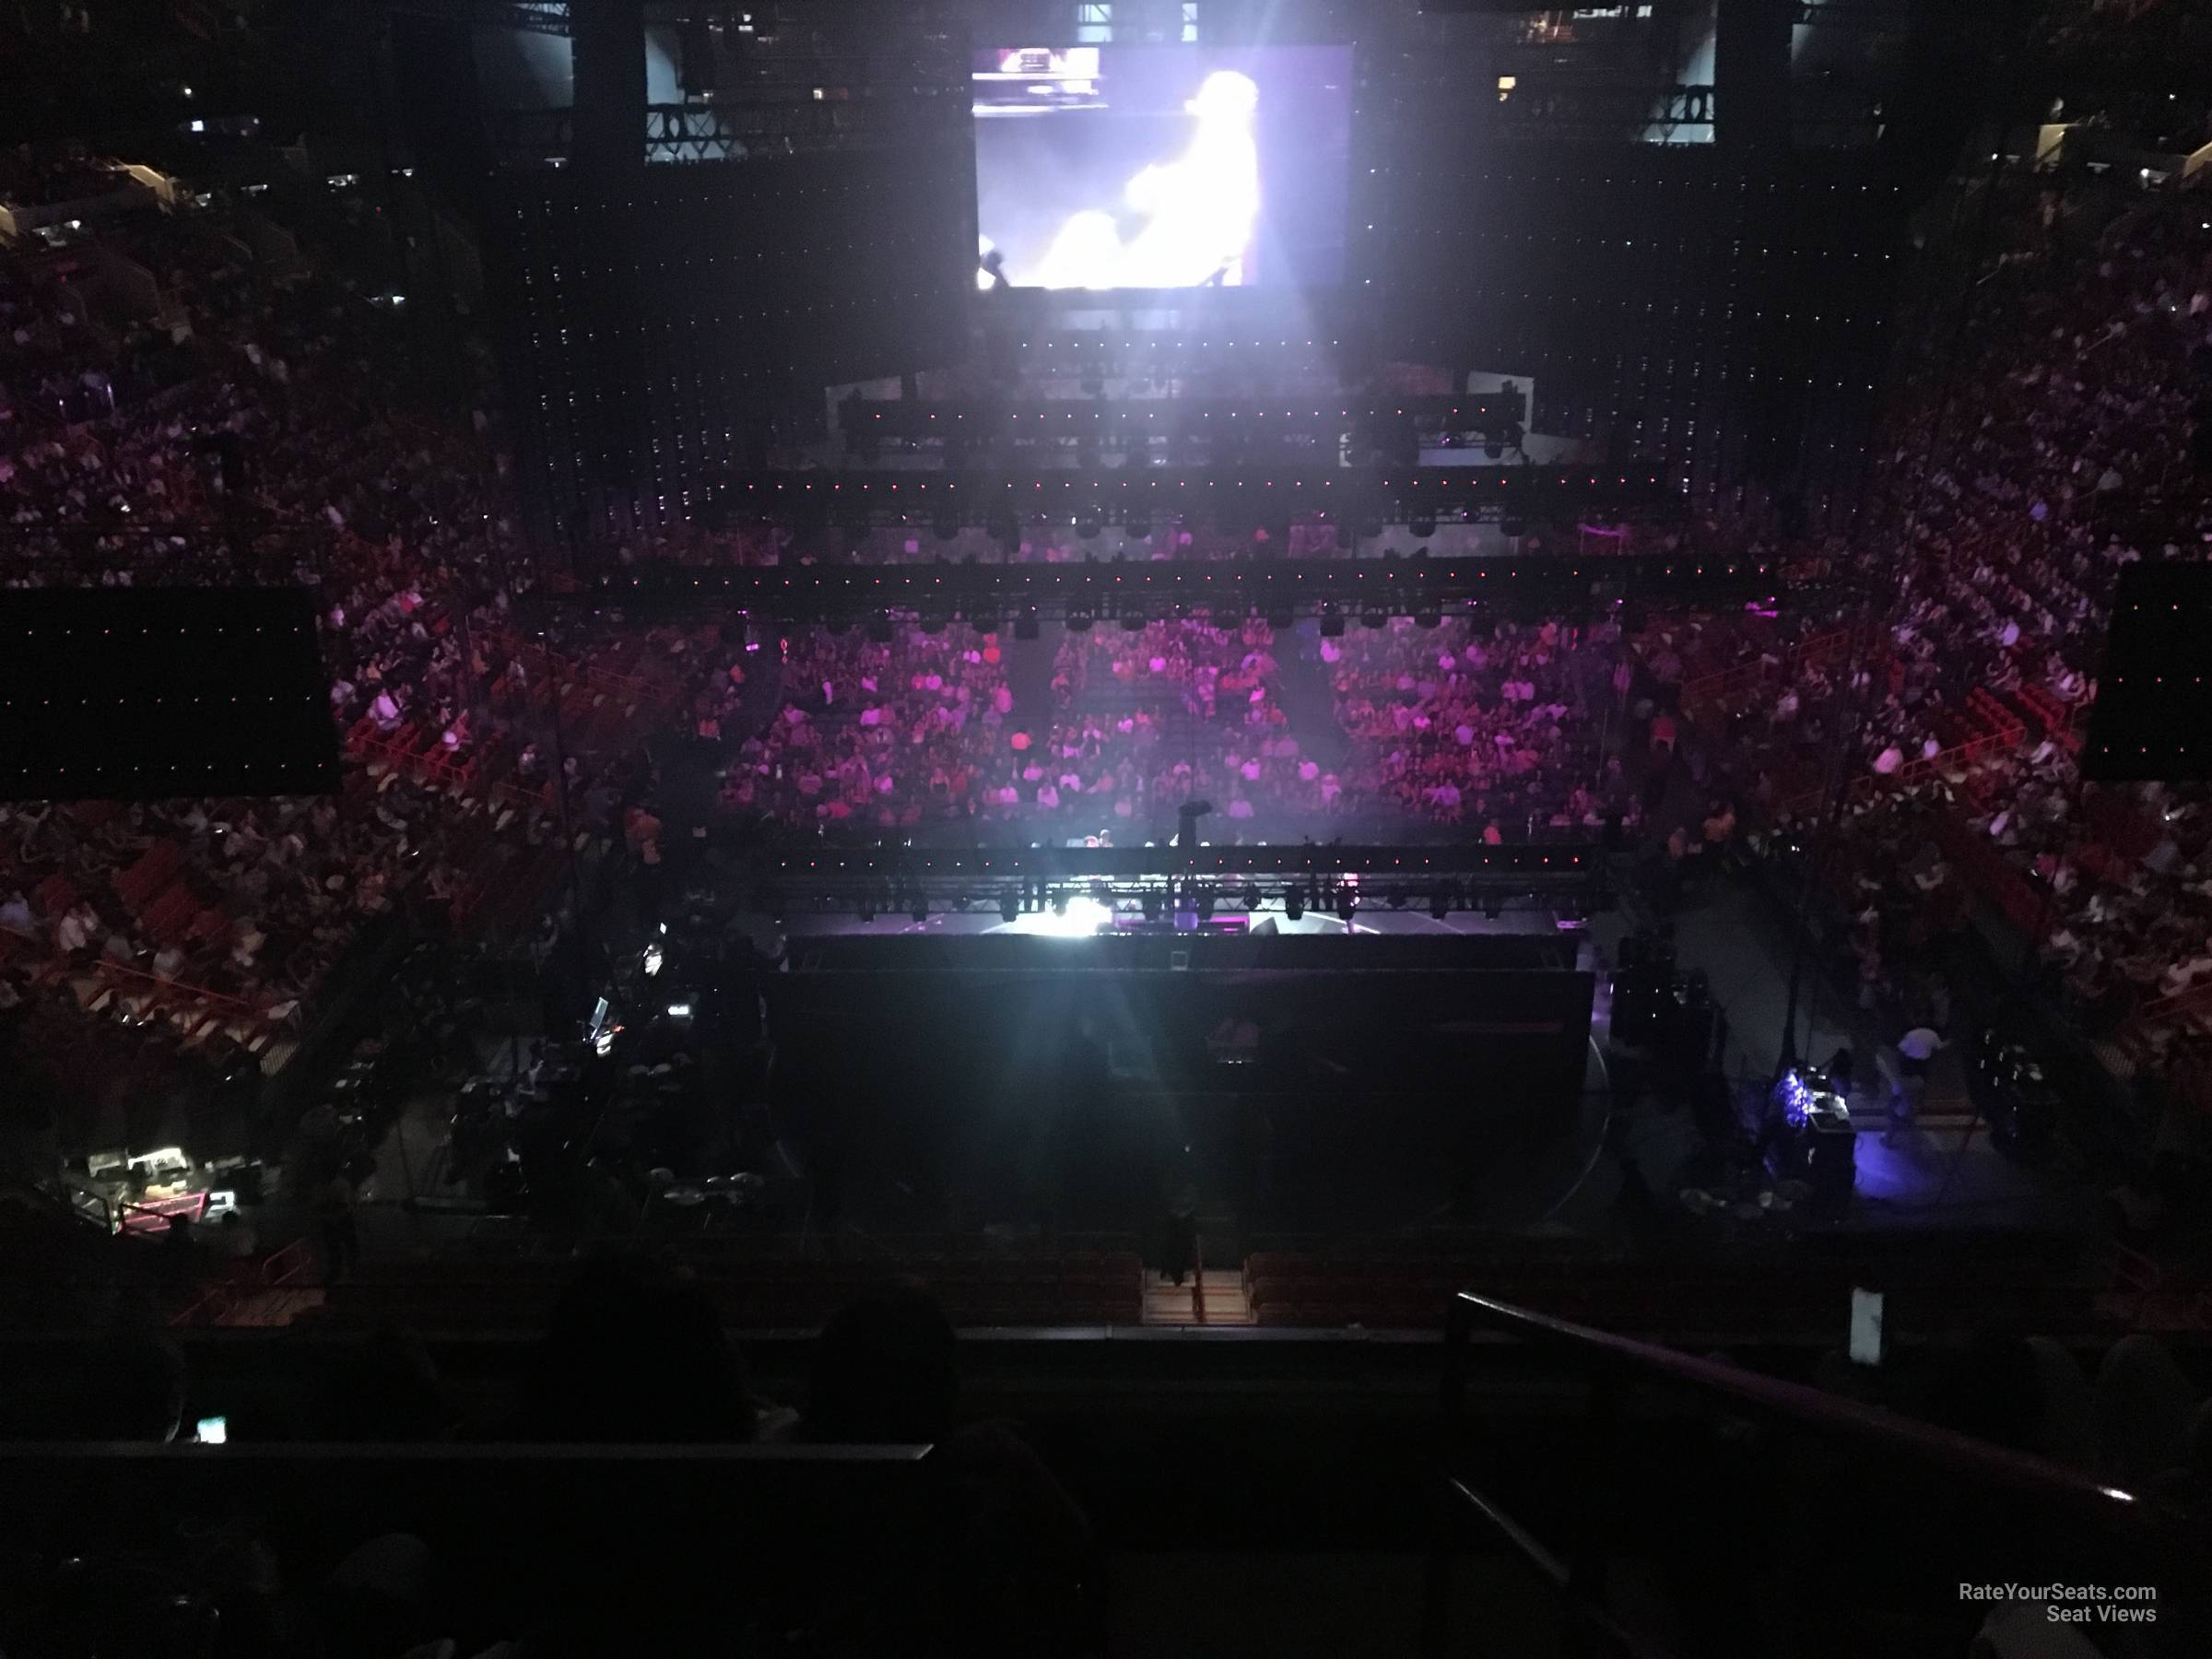 section 332, row 3 seat view  for concert - ftx arena